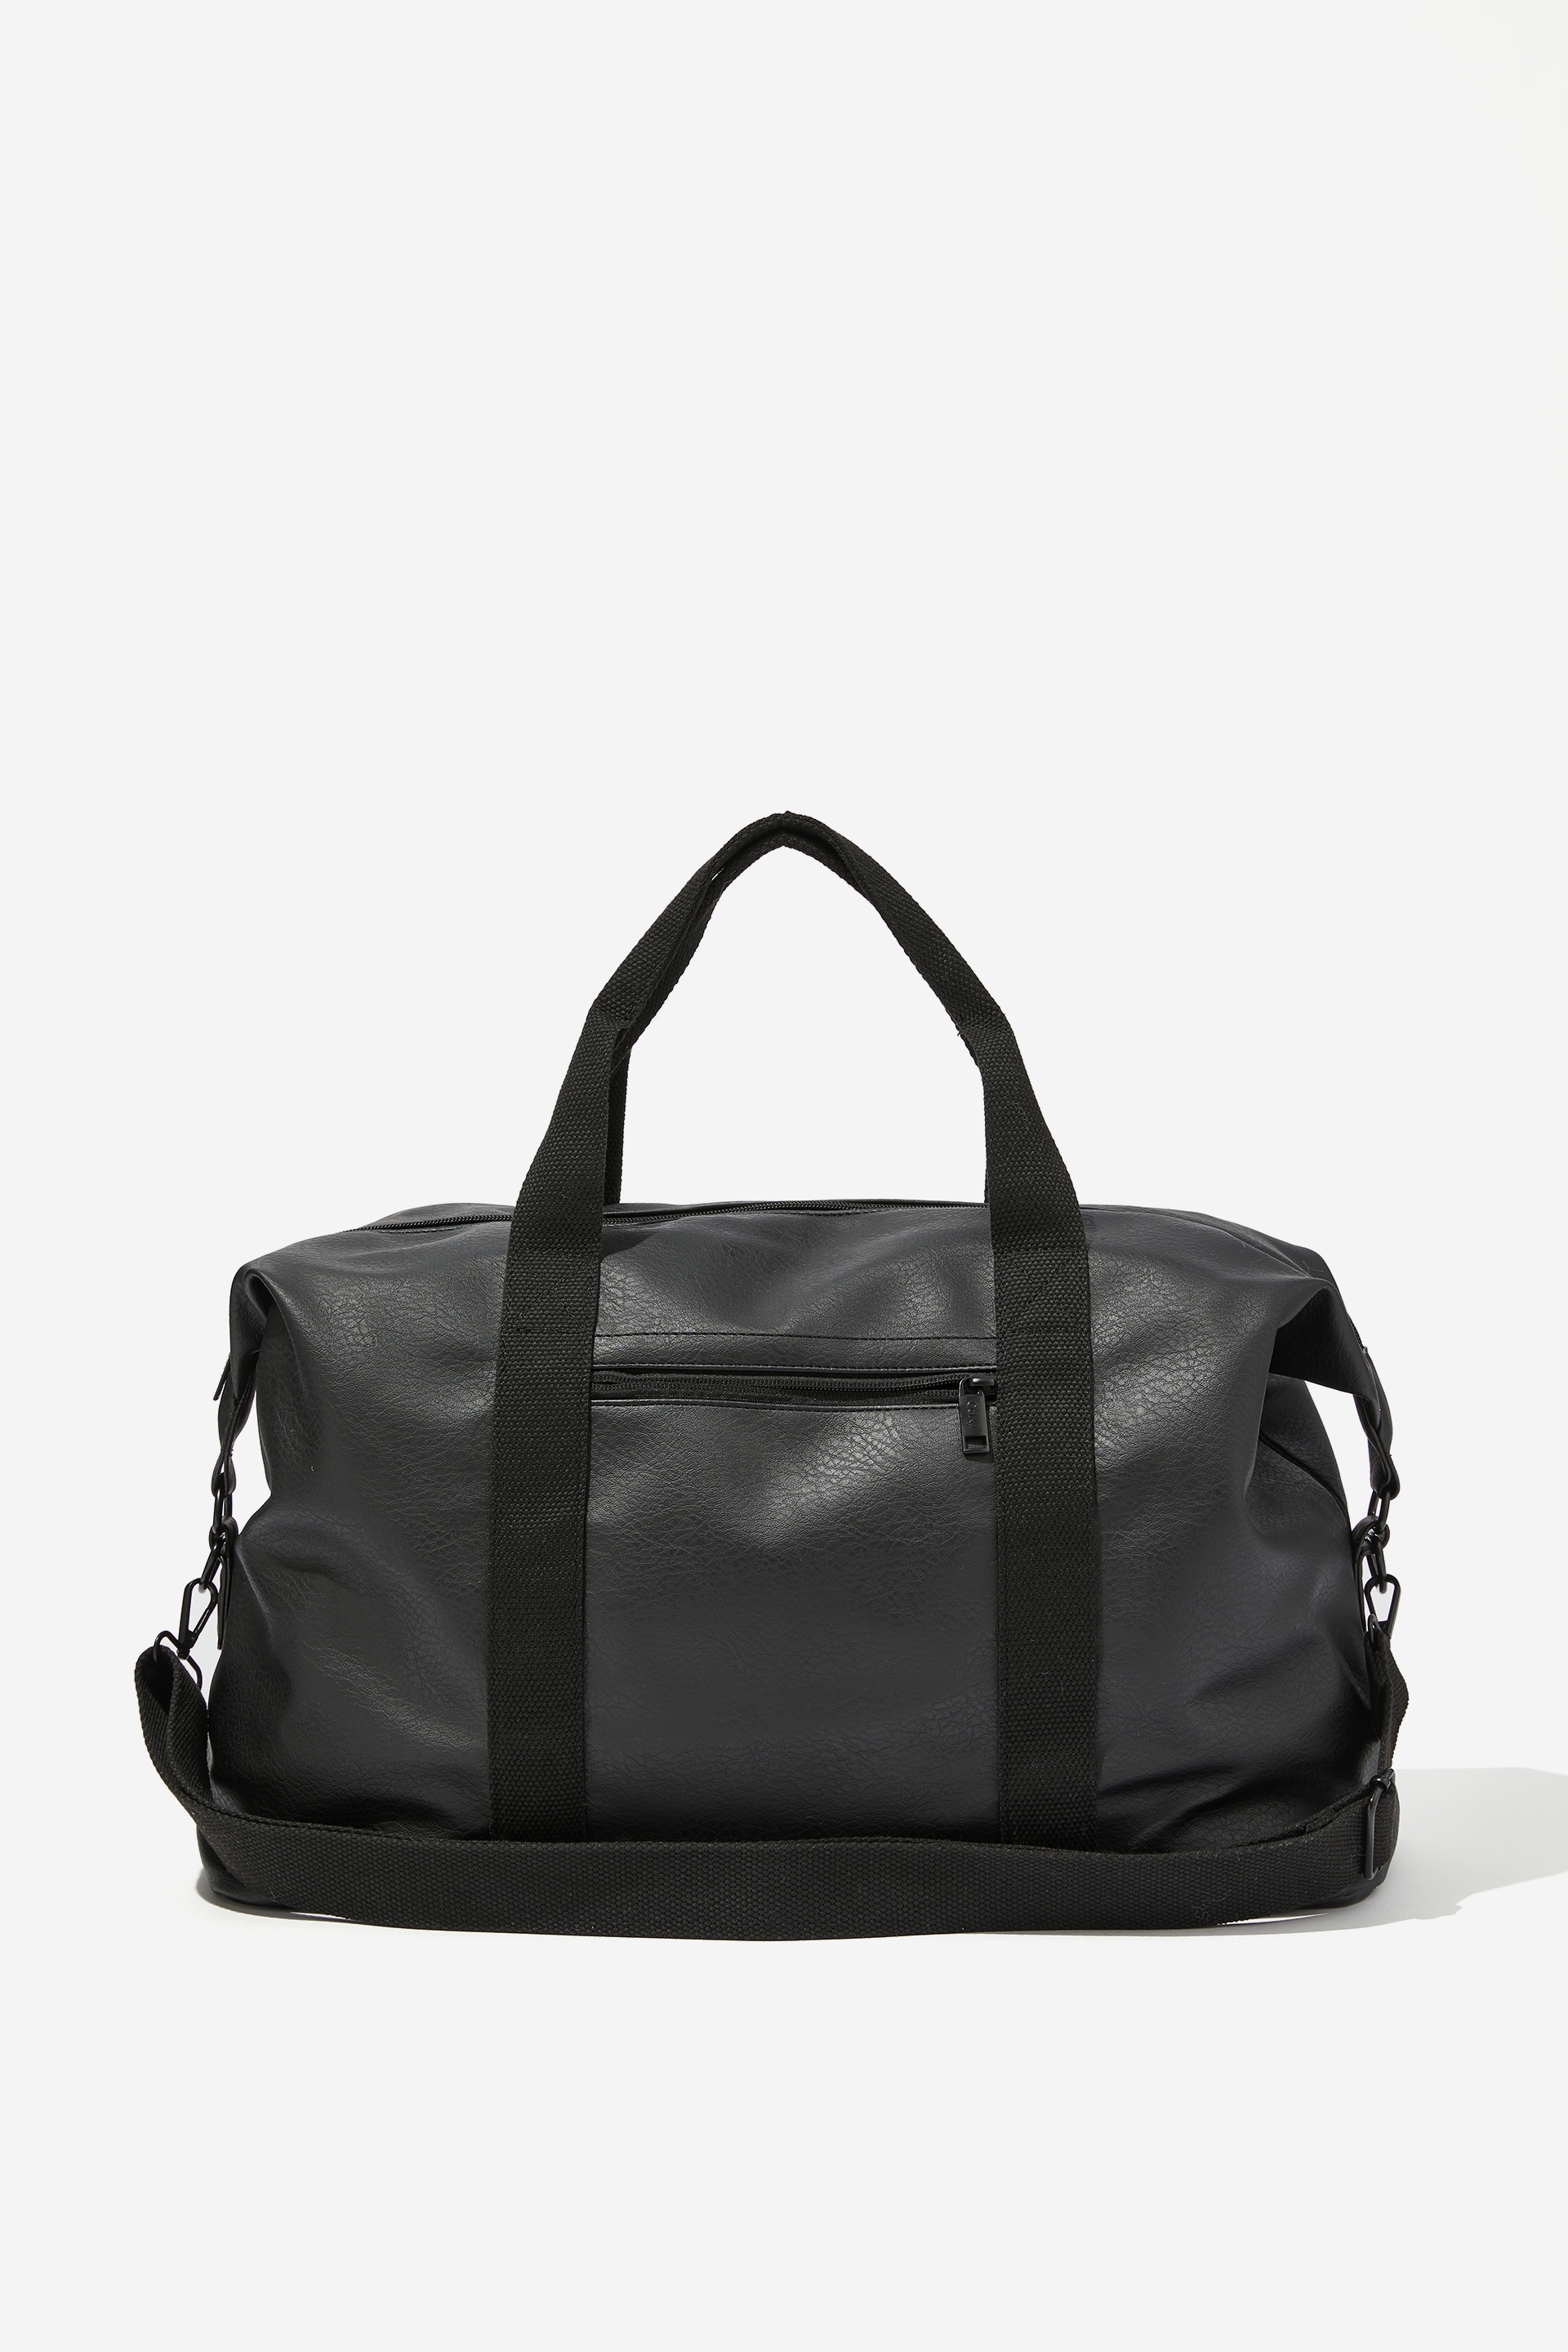 Off The Grid Holdall Duffle